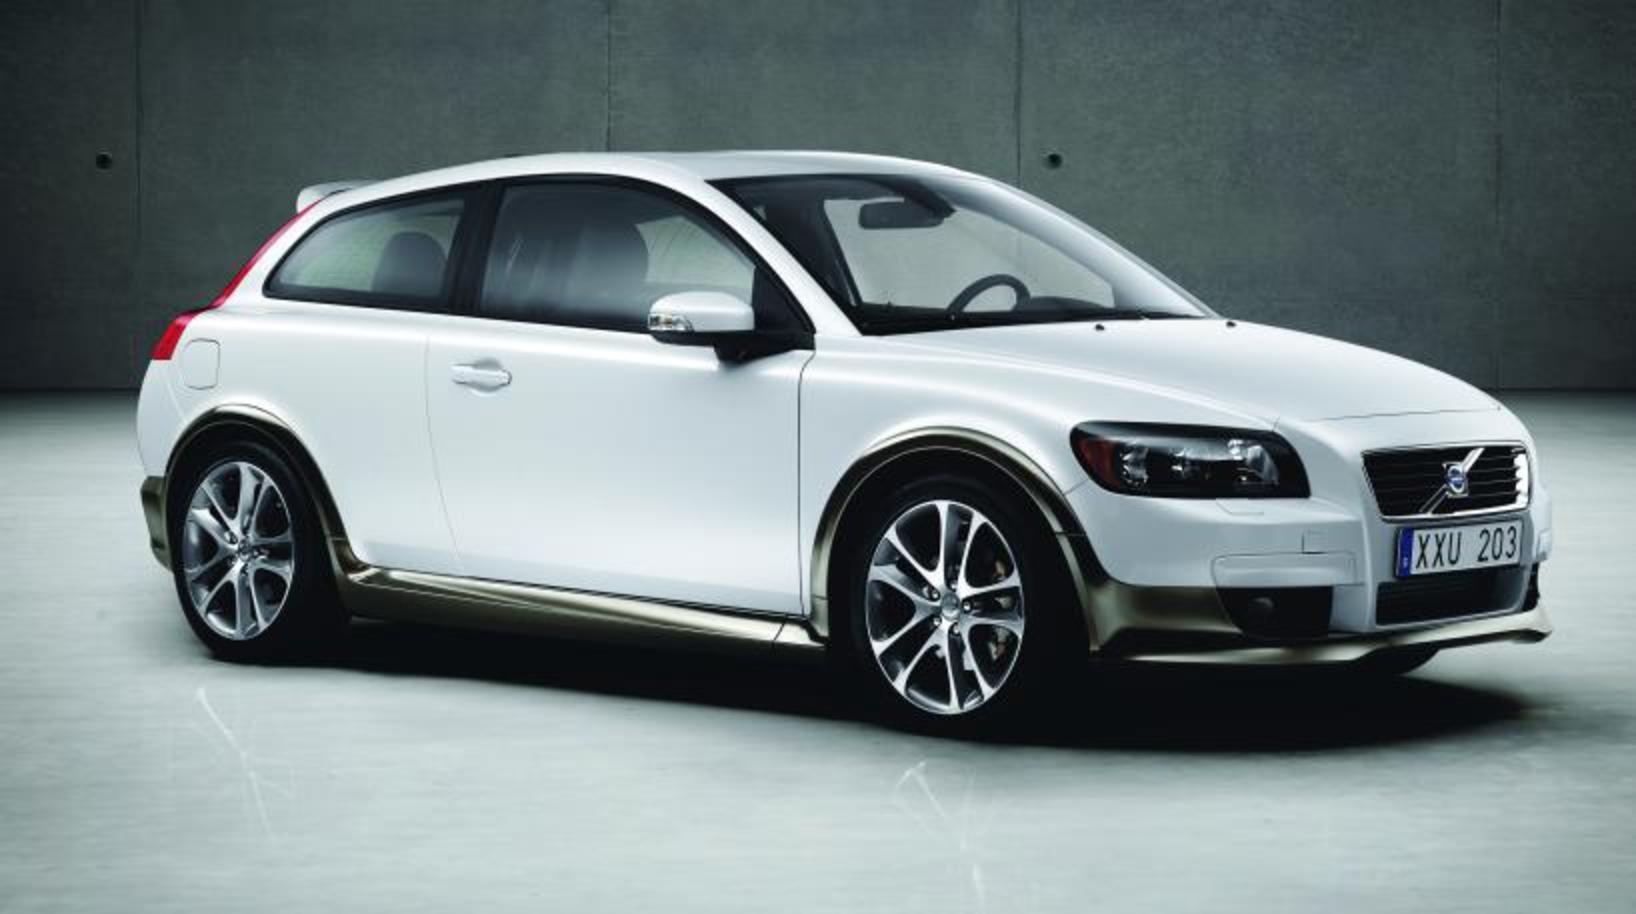 Volvo c30 start (655 comments) Views 28673 Rating 60